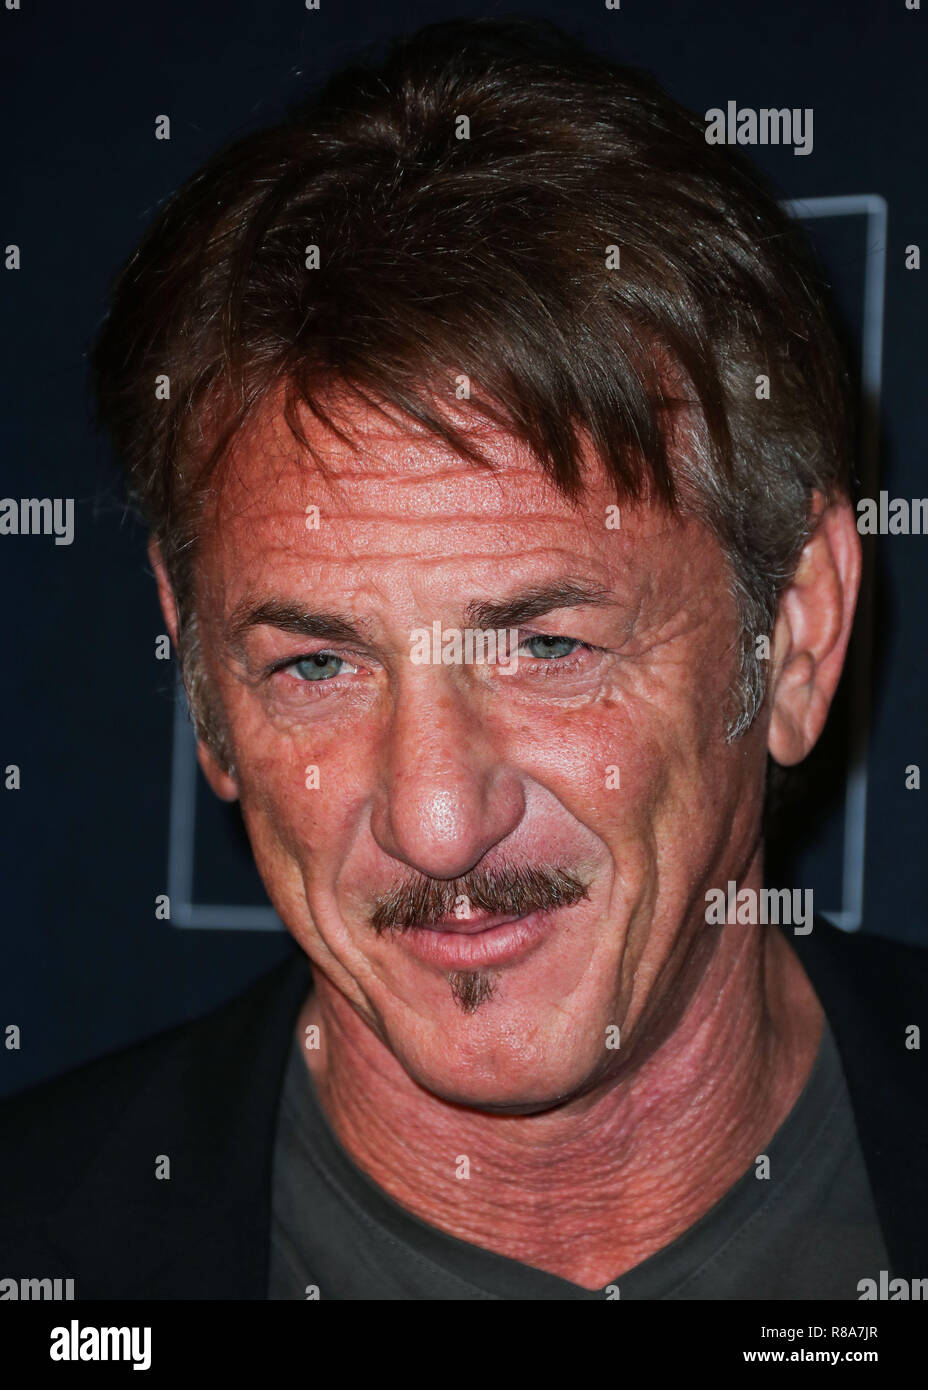 LOS ANGELES, CA, USA - OCTOBER 20: Sean Penn at the GO Campaign Gala 2018 held at the City Market Social House on October 20, 2018 in Los Angeles, California, United States. (Photo by Xavier Collin/Image Press Agency) Stock Photo